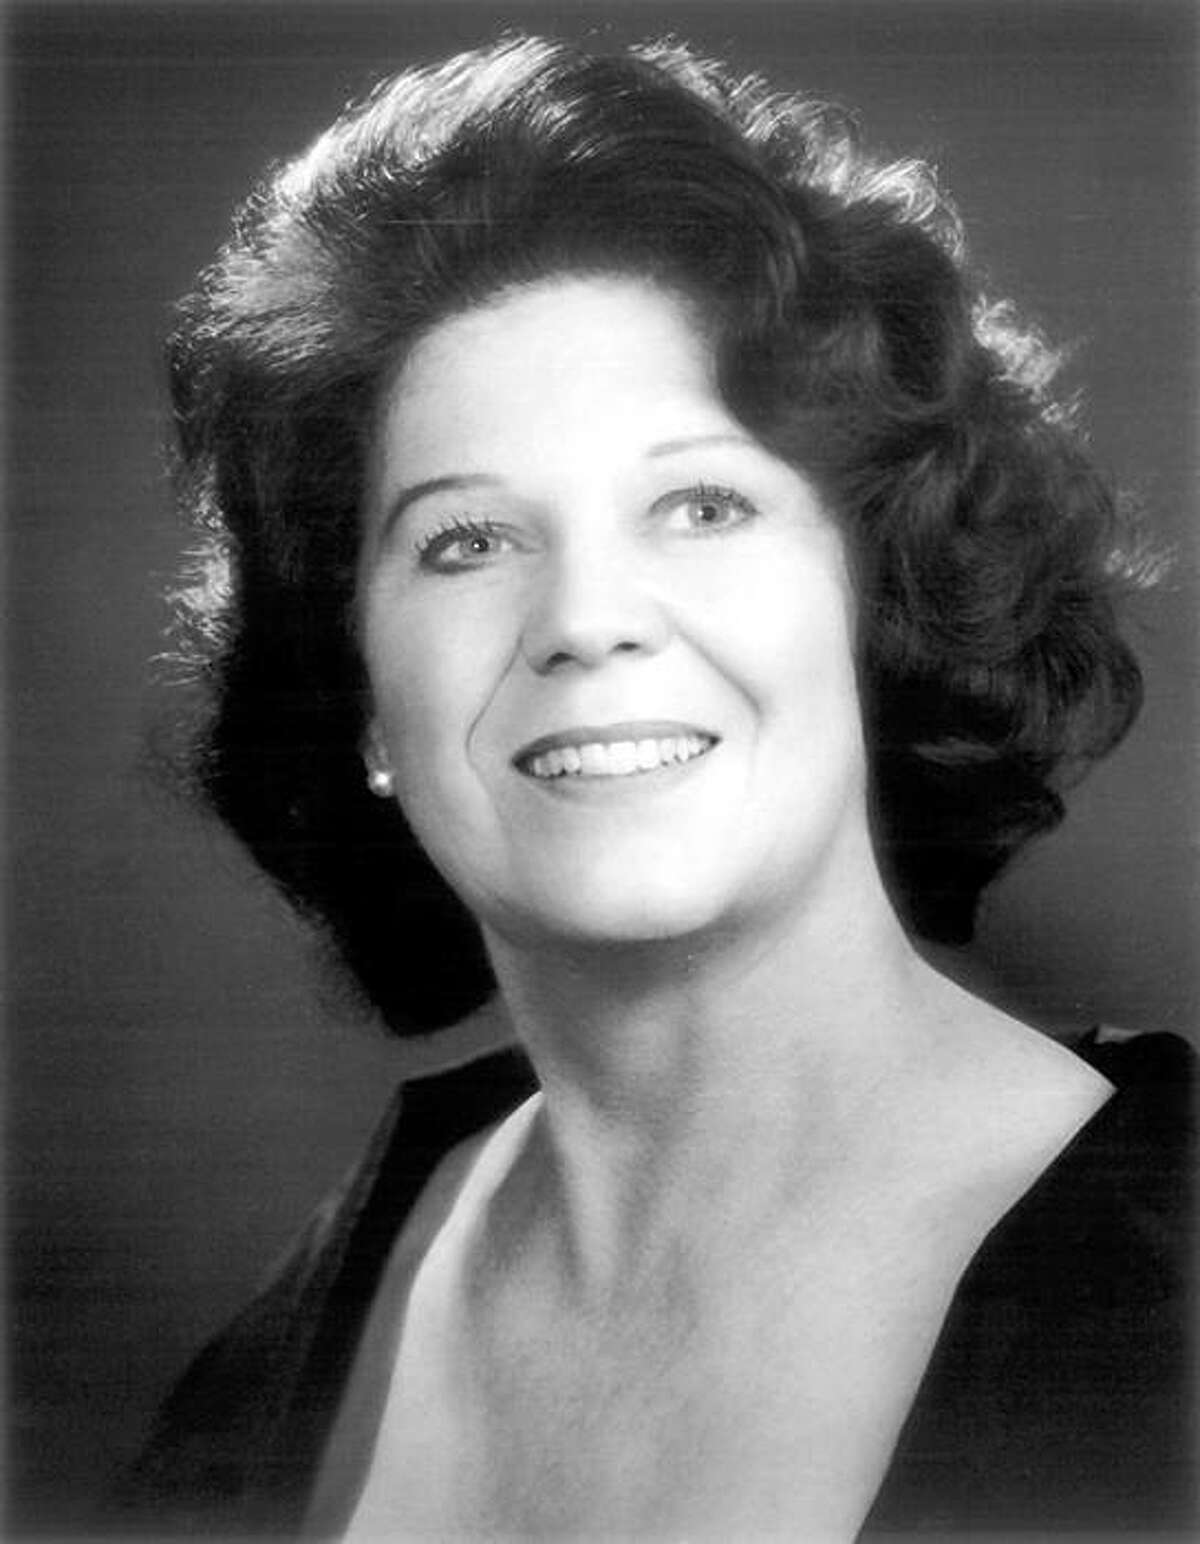 obit photo of Margery C. Tede, a mezzo-soprano who performed regularly in both contemporary and traditional repertoire and was a staunch supporter of the arts in the Bay Area, died Nov. 7 at California Pacific Medical Center following a brief illness. She was 76.